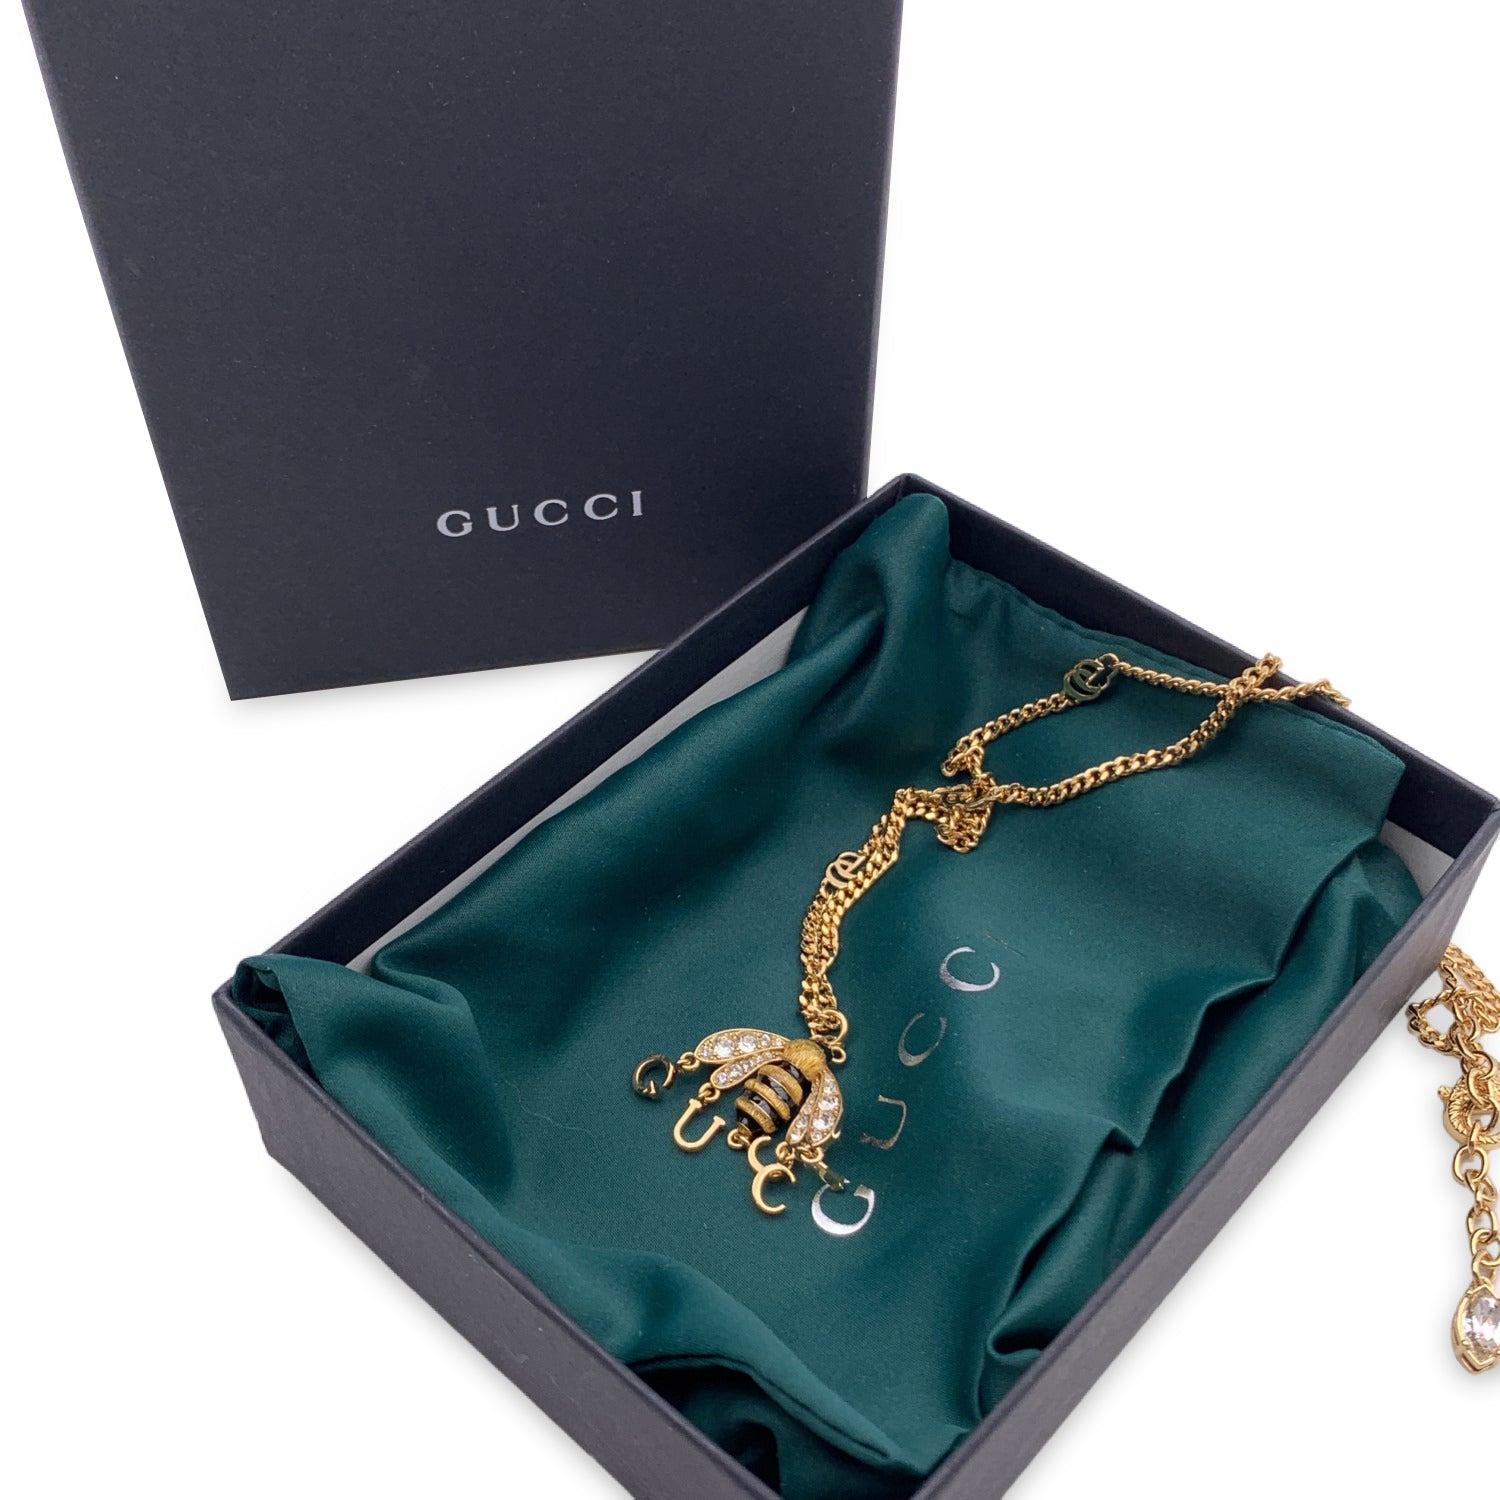 Gucci gold metal chain necklace with bee pendant embellished with crystals and dangling G.U.C.C.I. charms. Lobster clasp closure. Adjustable length. Total length of the chain: 19 inches - 48.3 cm. Condition A+ - MINT Gucci box and pouch included.